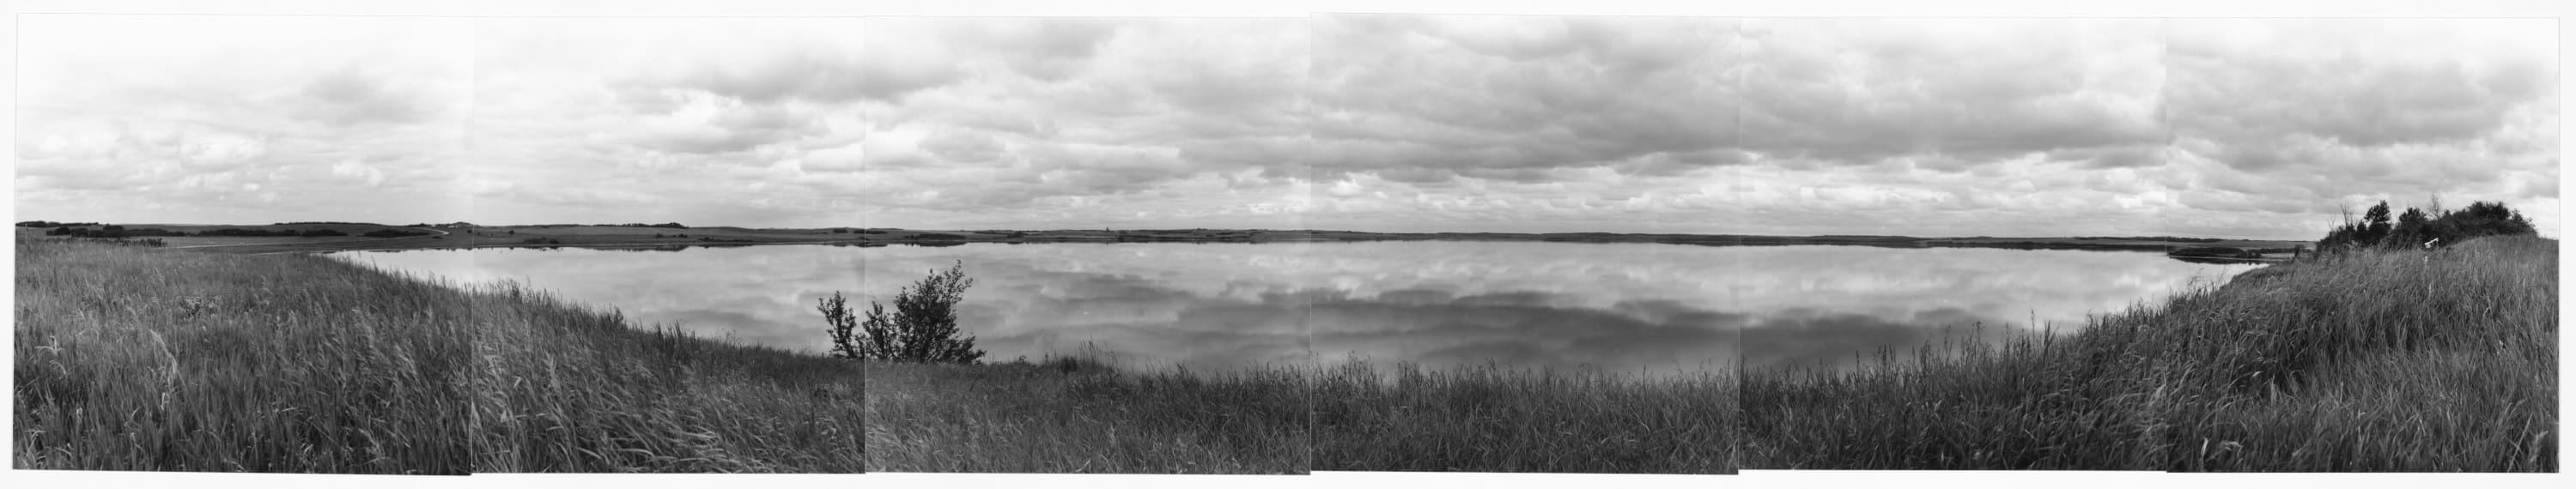 Black and white six panel panorama photo overlooking the lake at Prud’homme. All six panels reveal the beautiful reflection of the prairie sky in the water below.